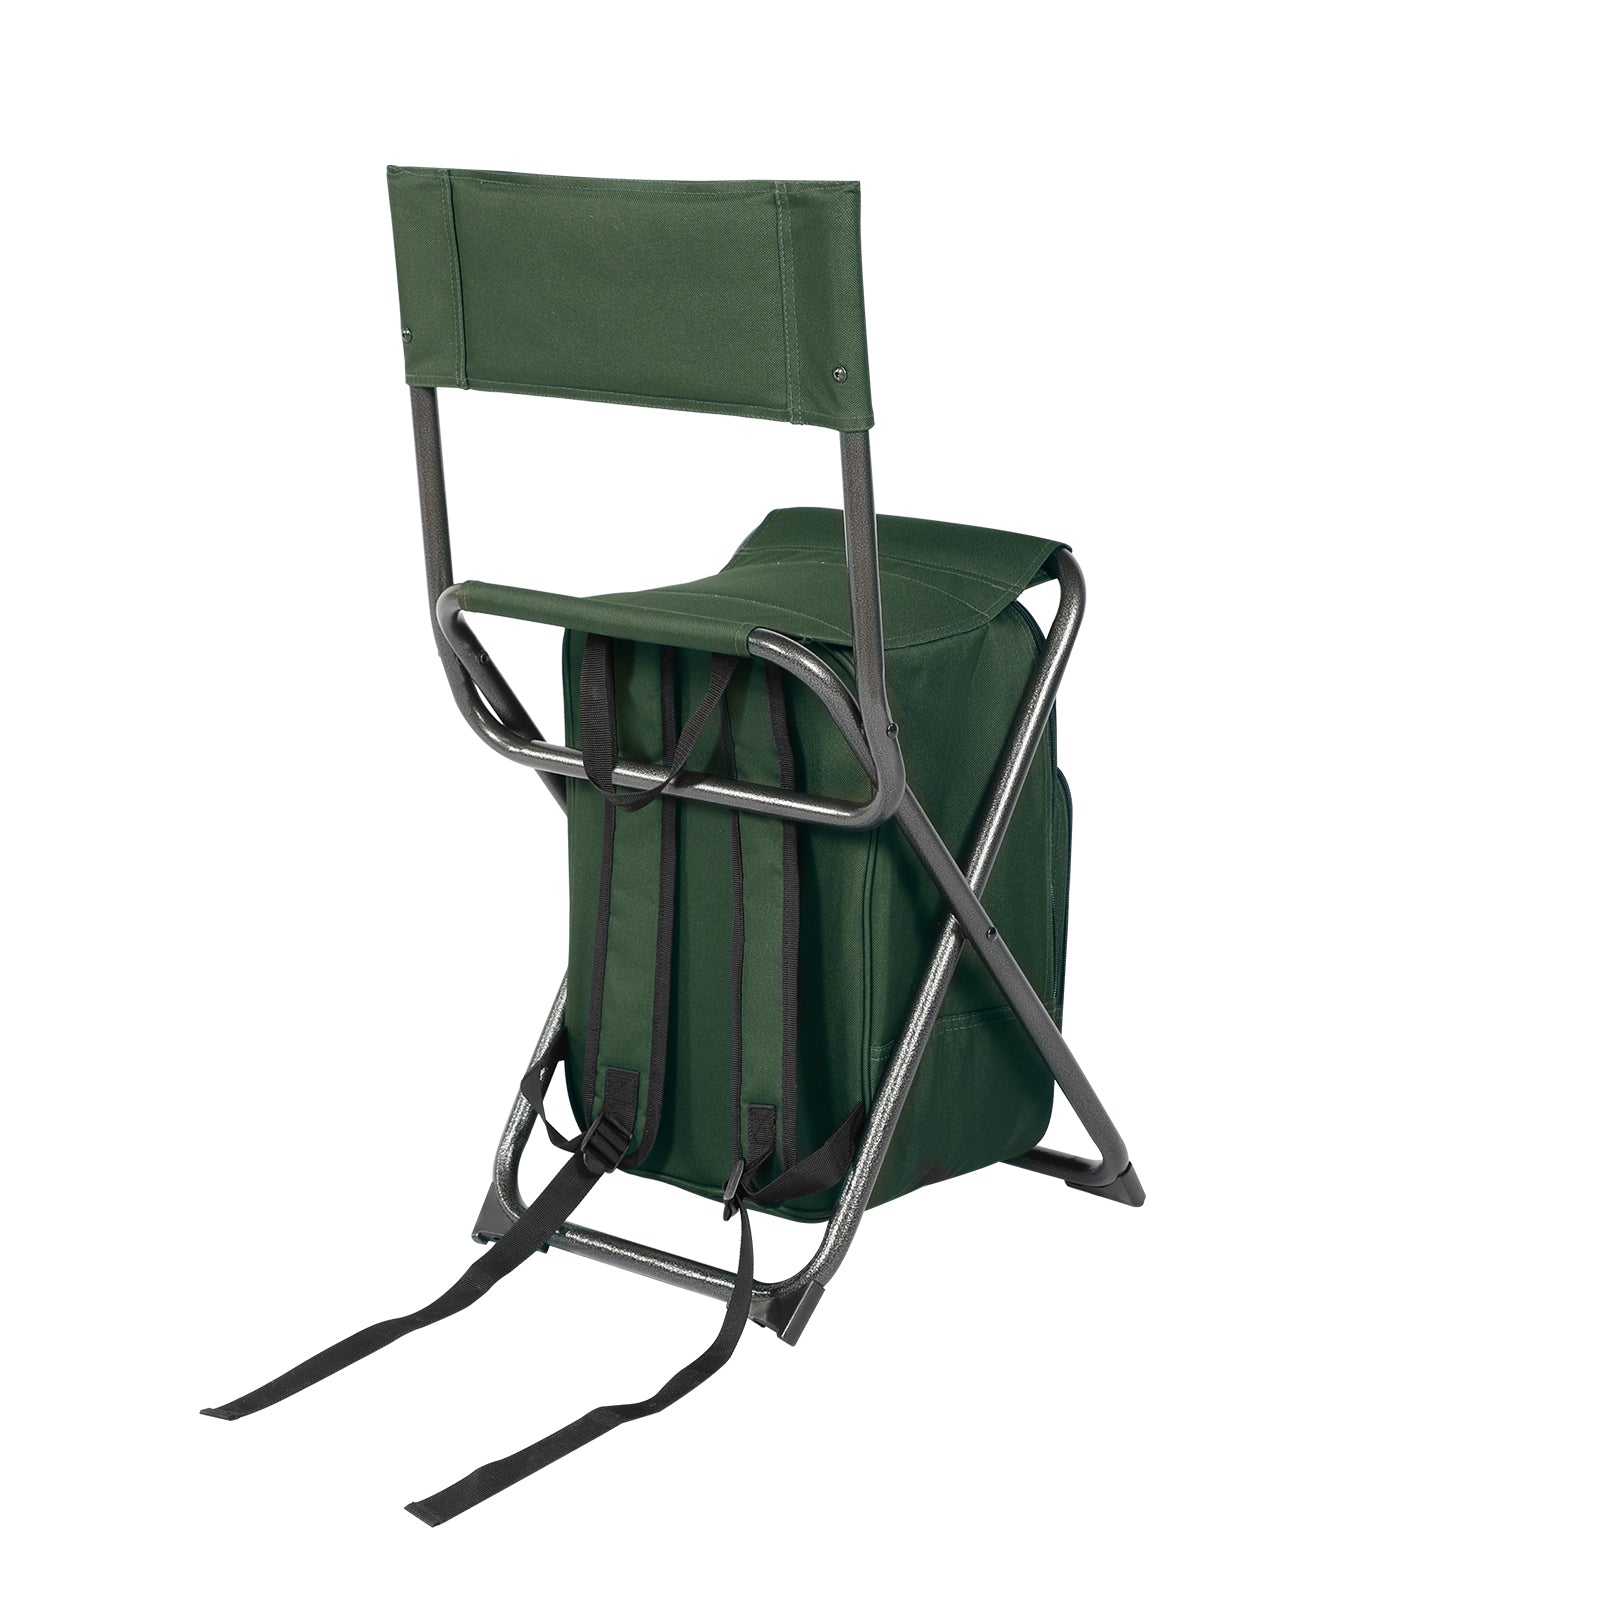  PORTAL Backpack Cooler Chair Fishing Chairs with